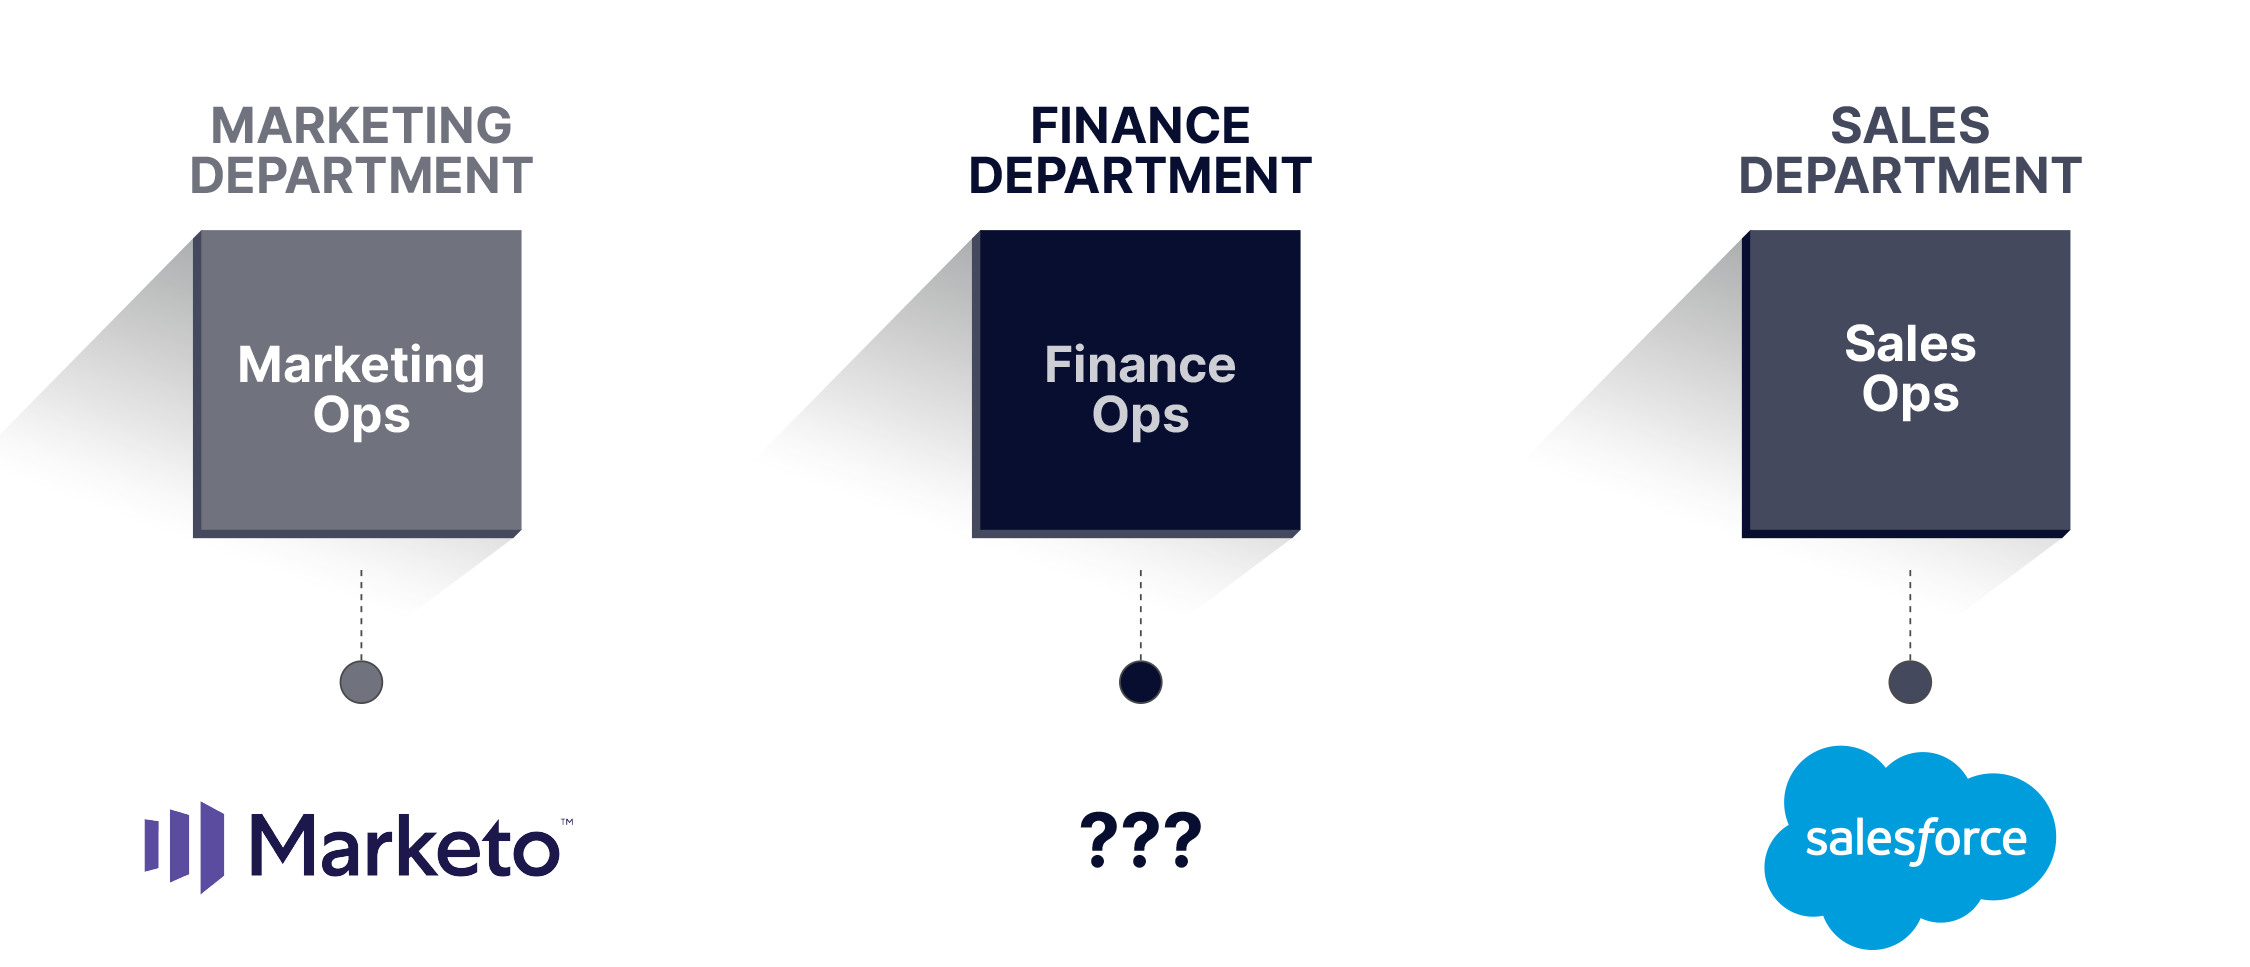 Finance needs the support of Finance Operations (FinOps)